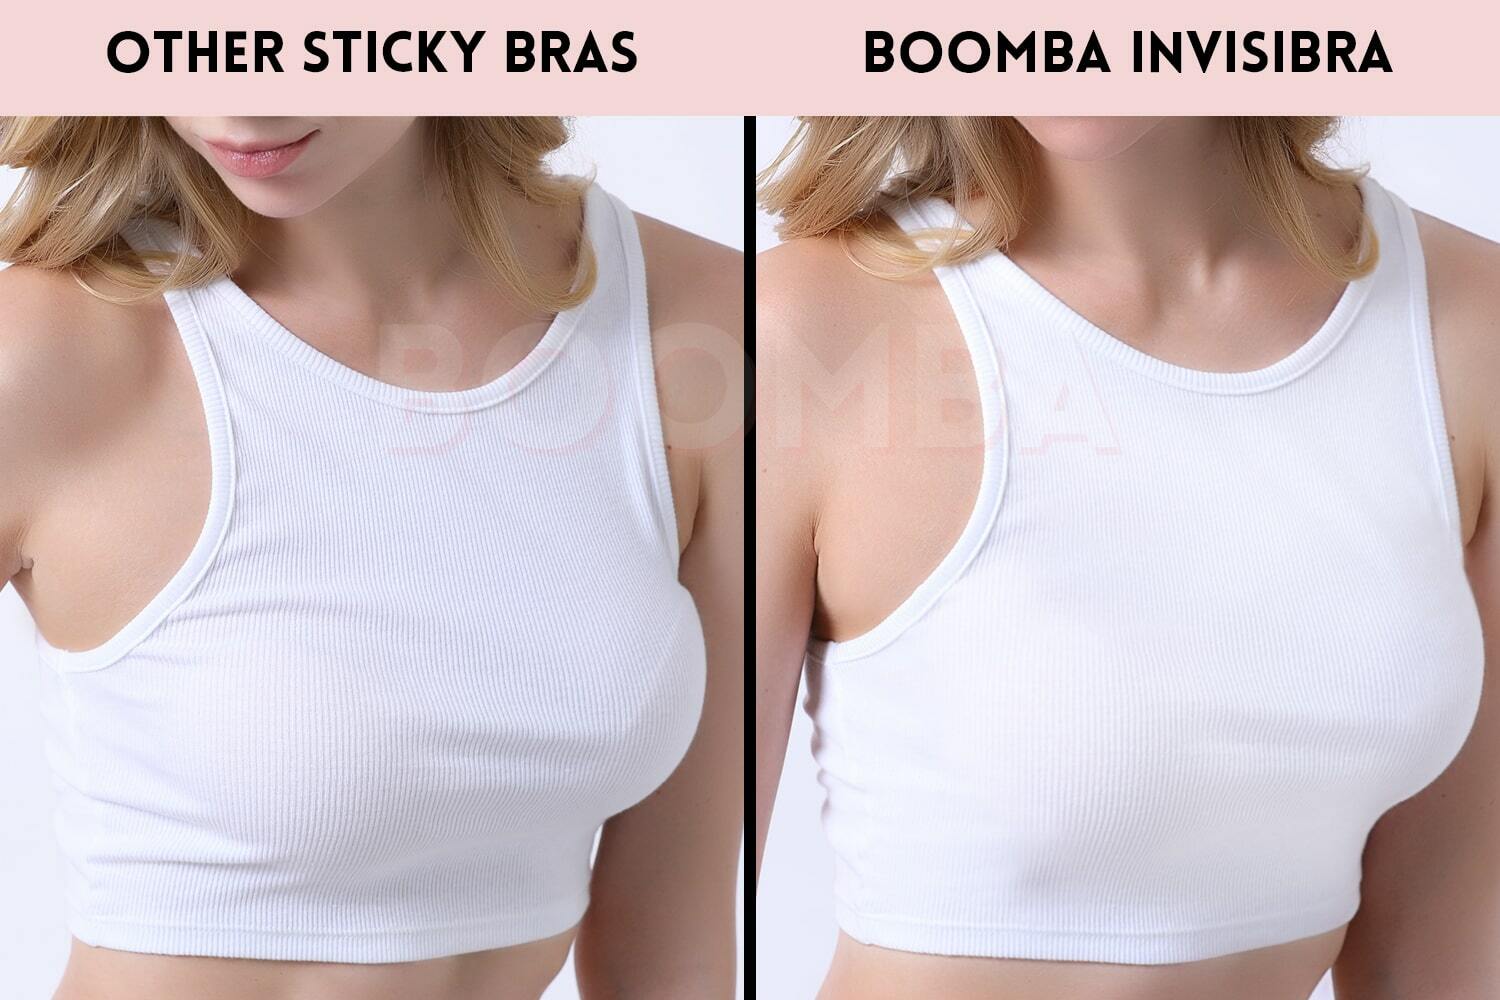 before_after_invisibra_2-min (1).jpg